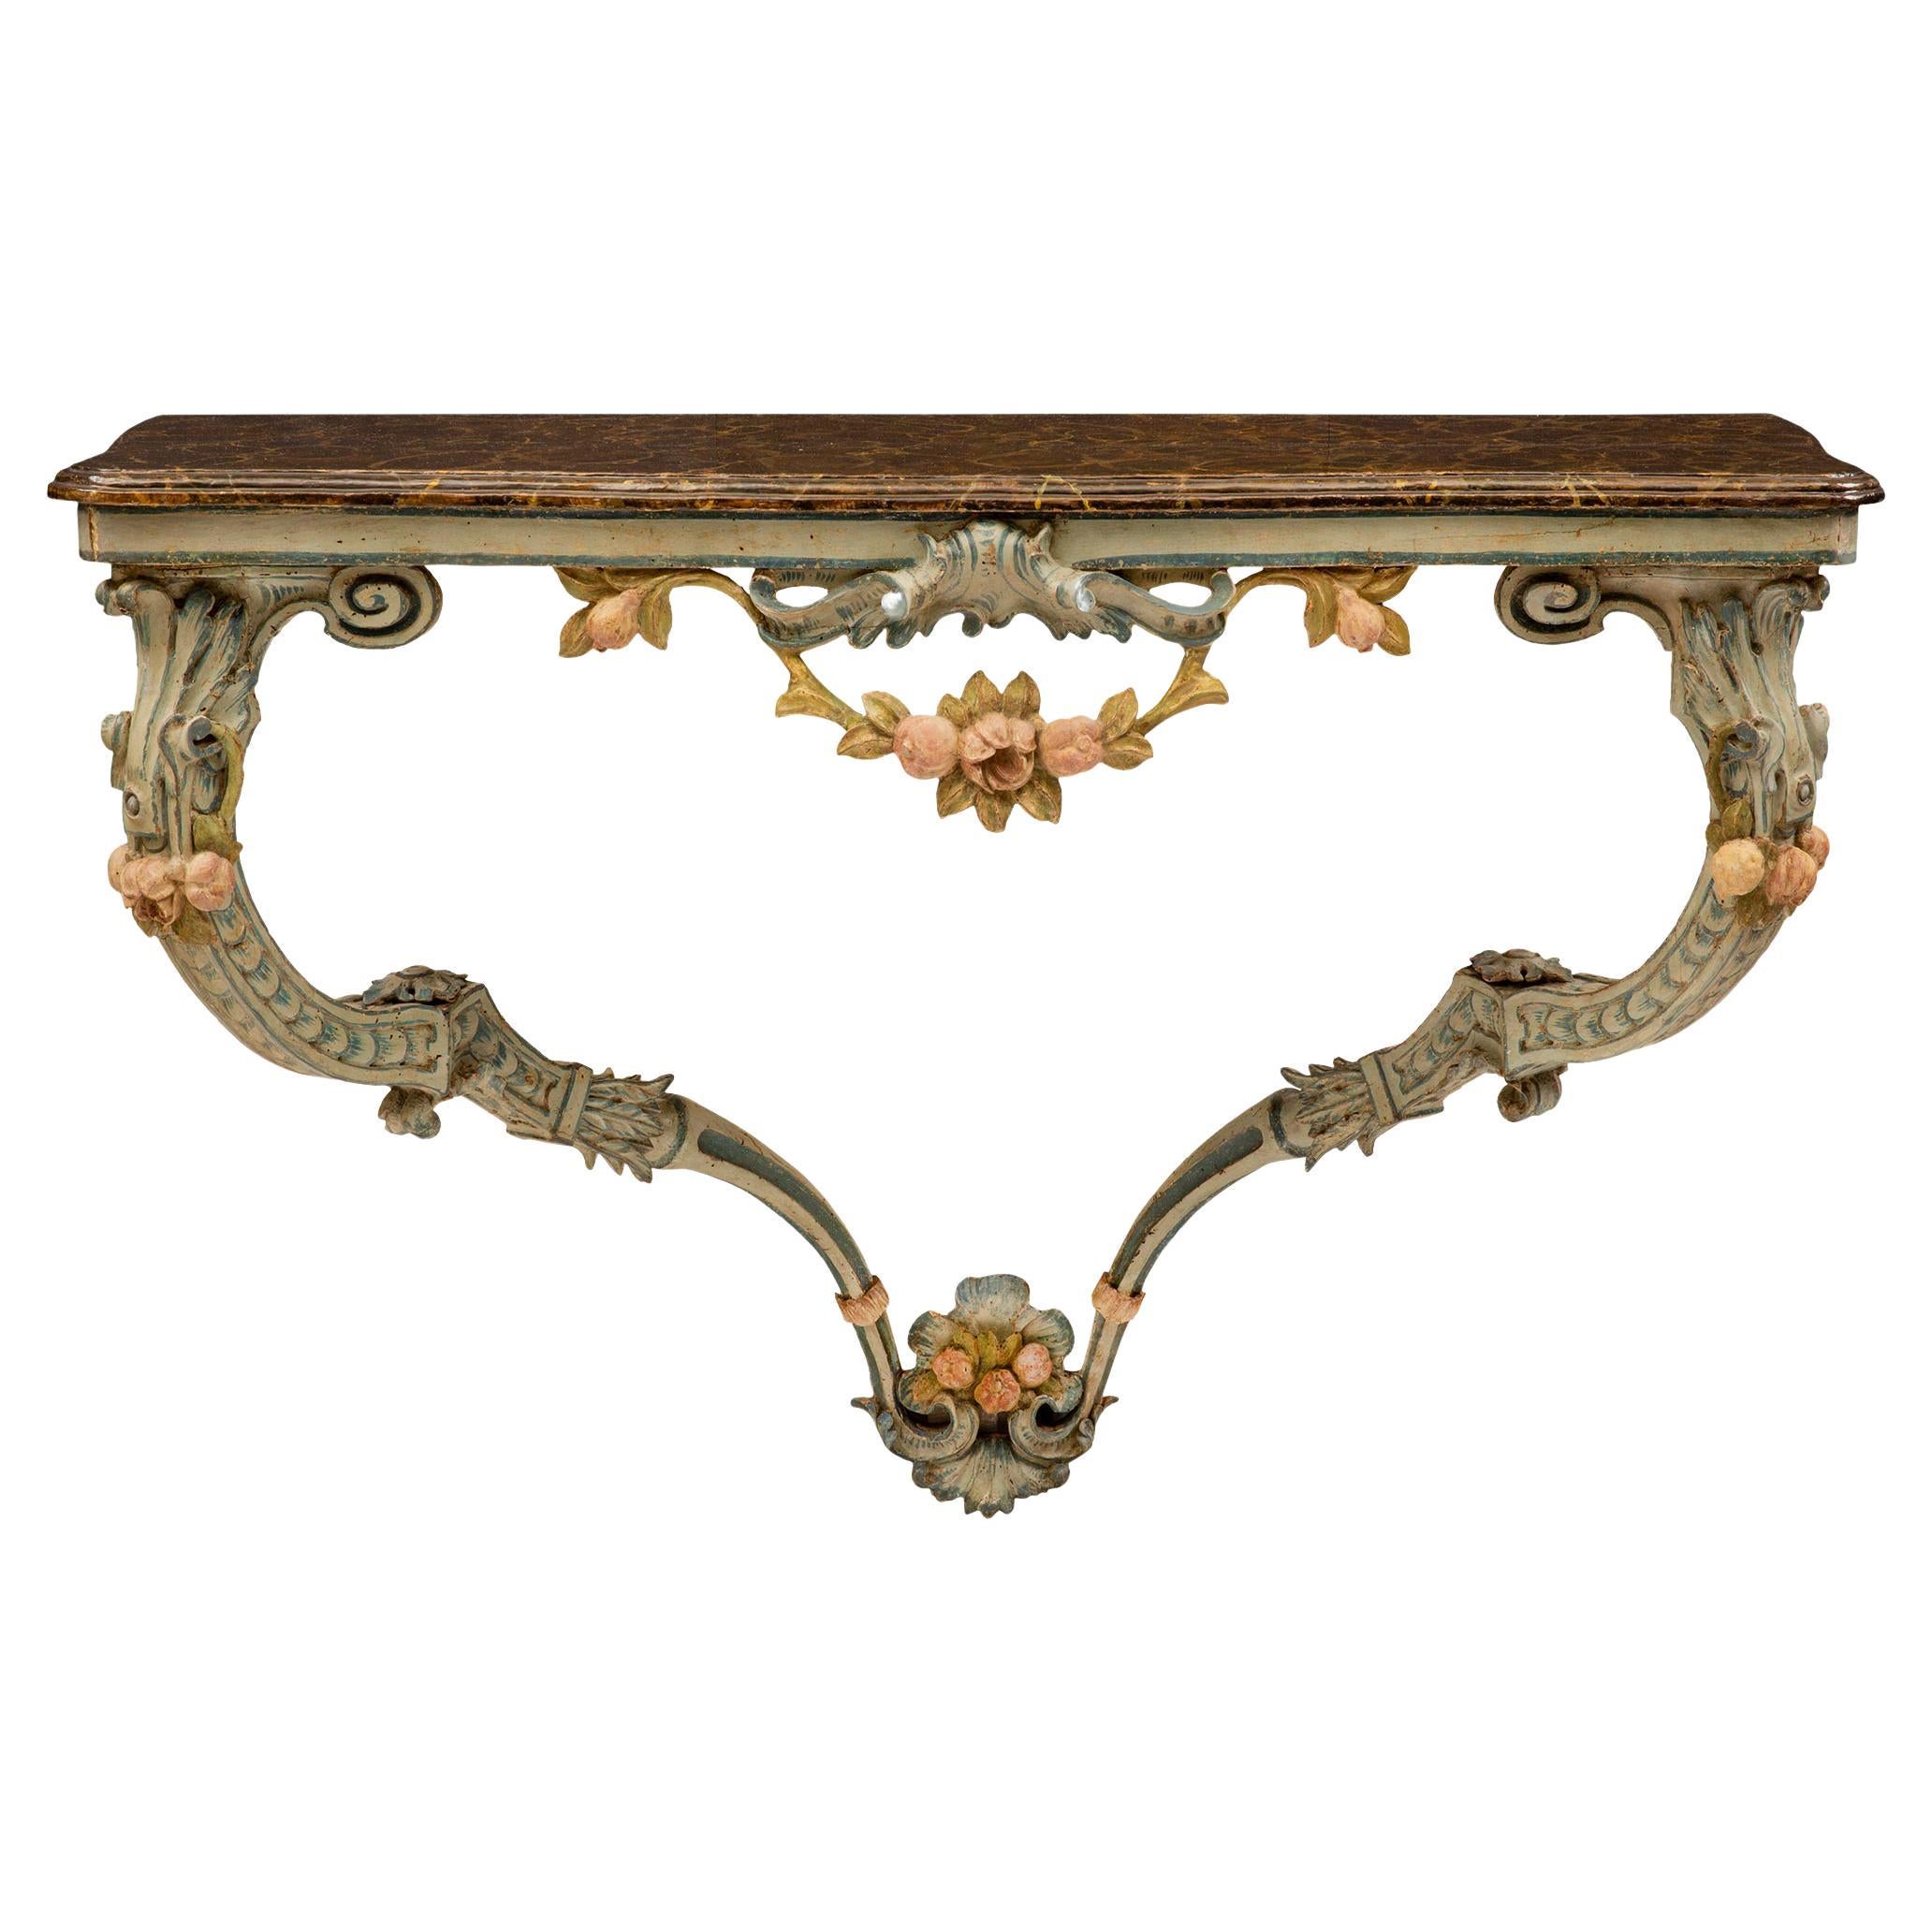  Italian 18th Century Louis XV Period Patinated Wood Wall Mounted Console For Sale